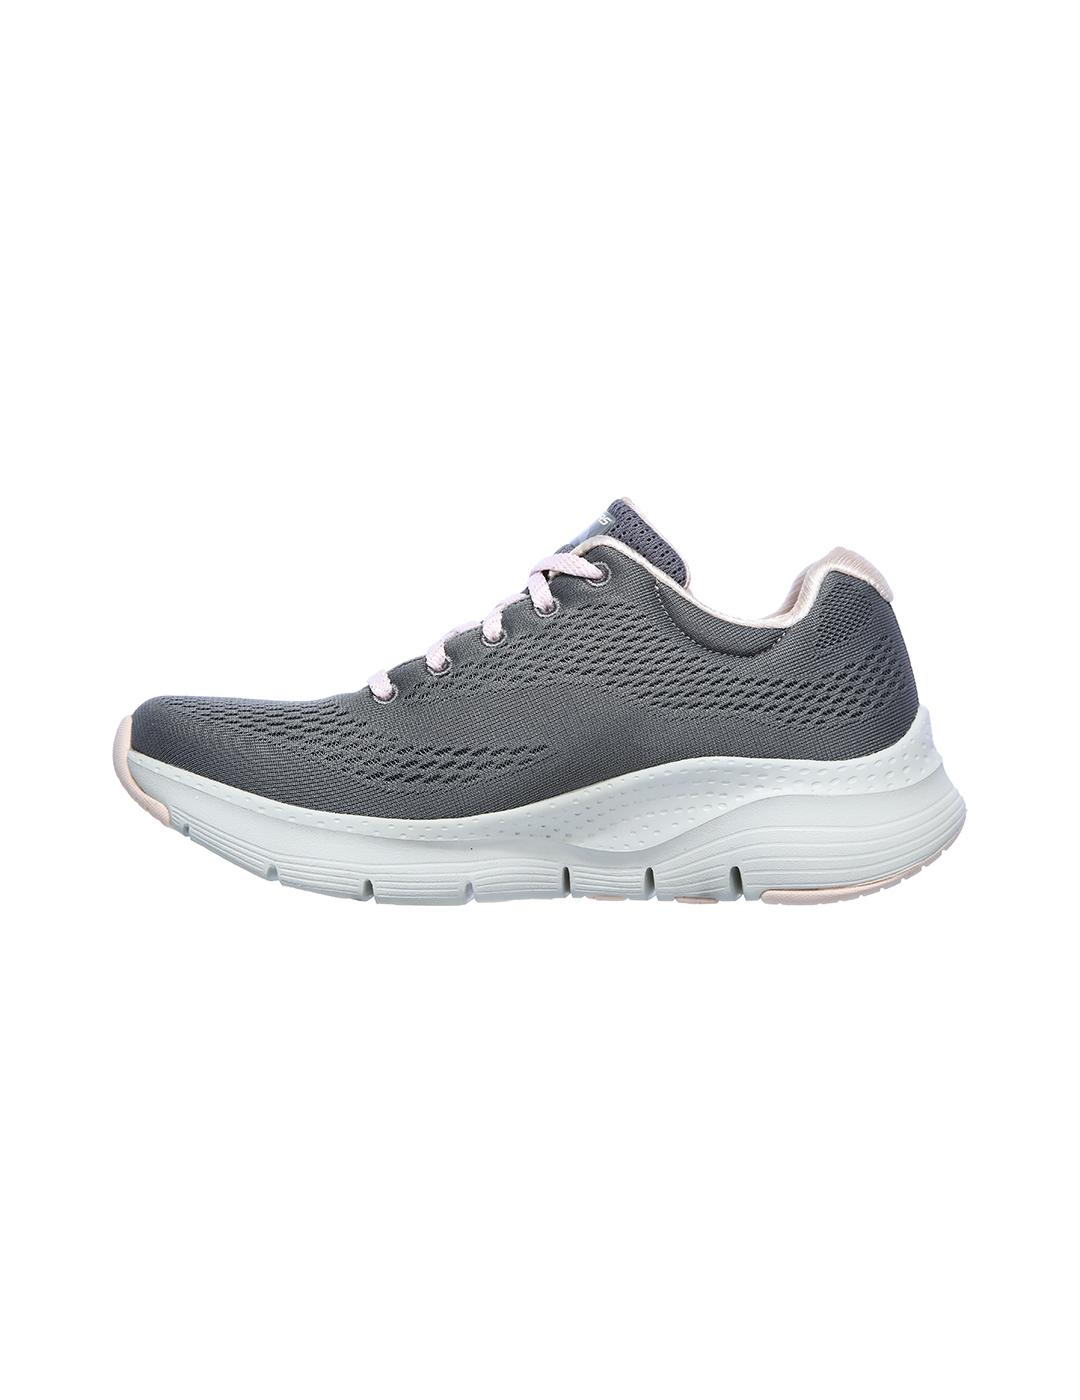 Zapatillas Skechers Arch Fit Big Appeal grises para mujer